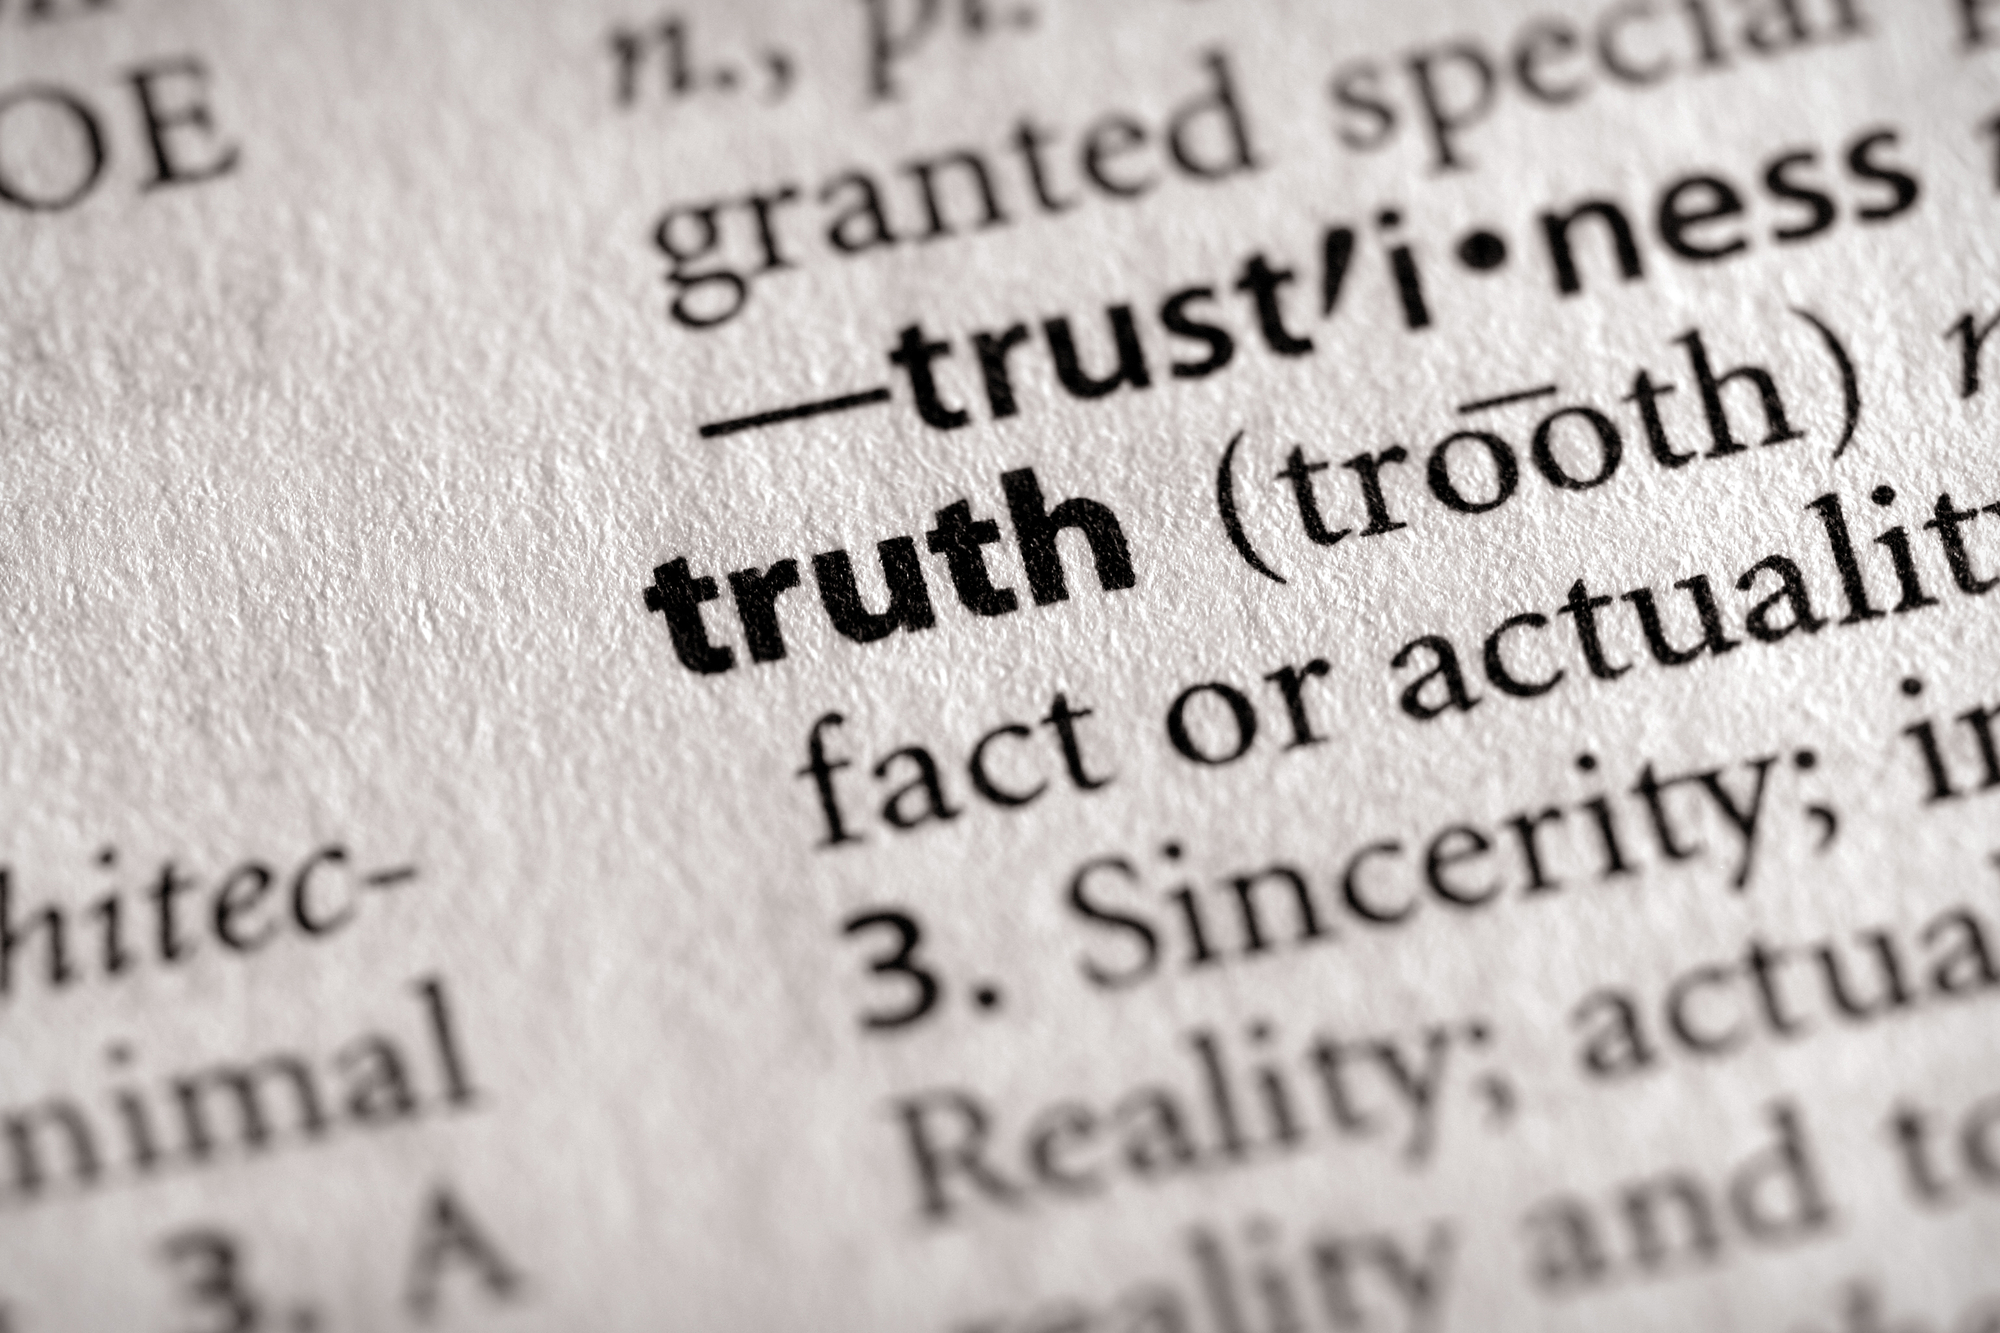 photograph of dictionary entry fro "truth"